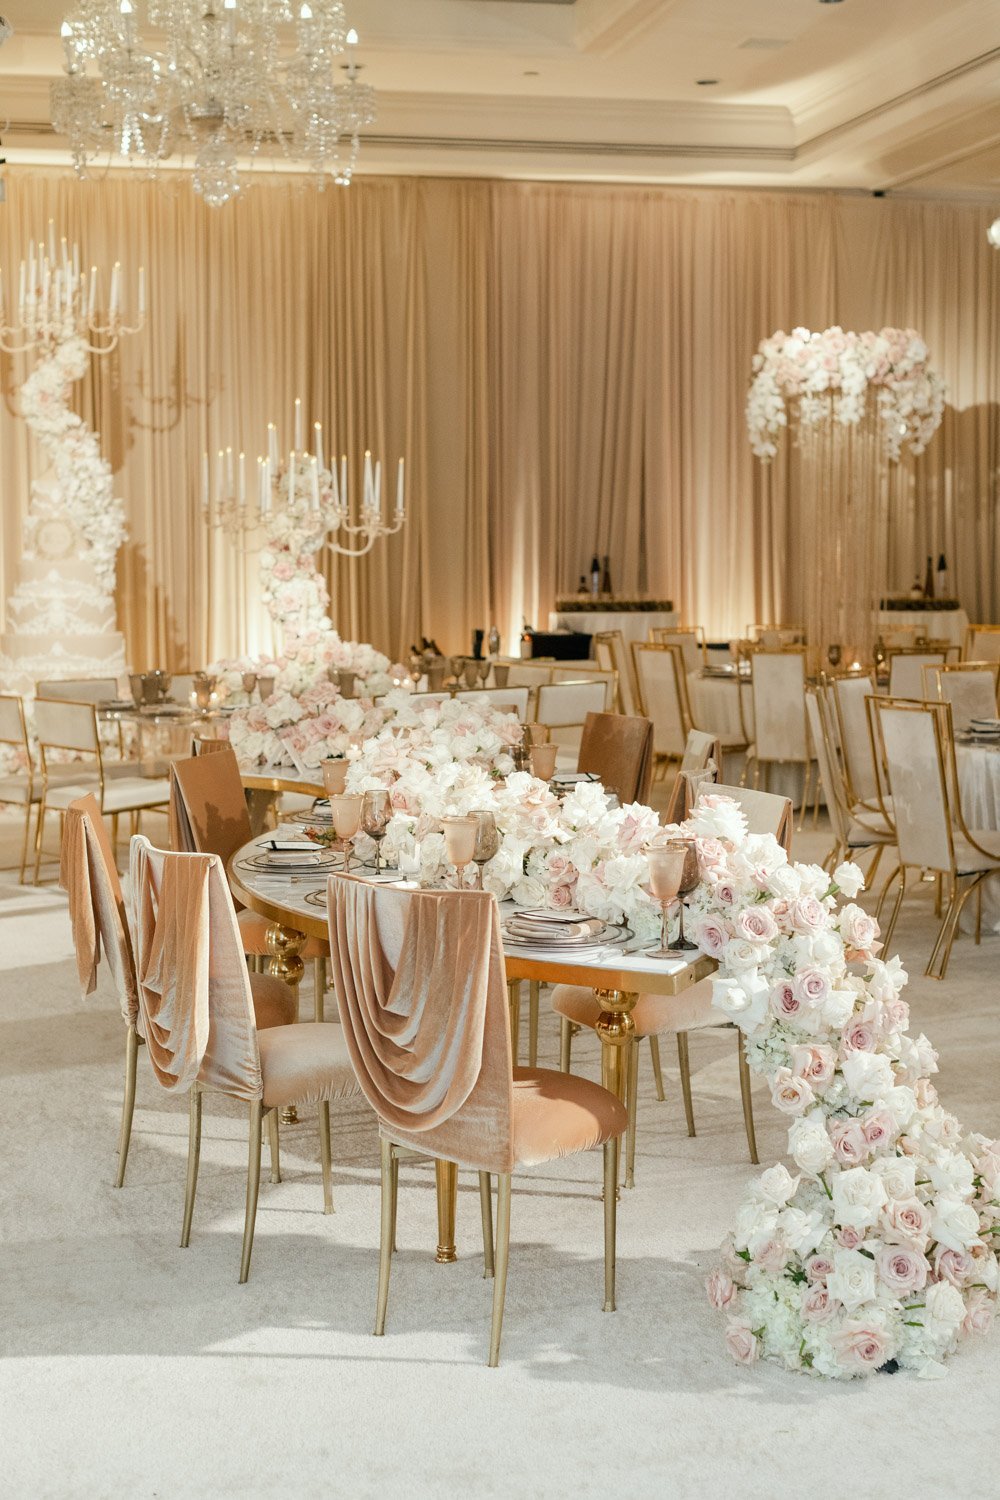 Crystal and gold accent velvet seating create a bright and bold ballroom setting at the Ritz-Carlton Laguna Niguel